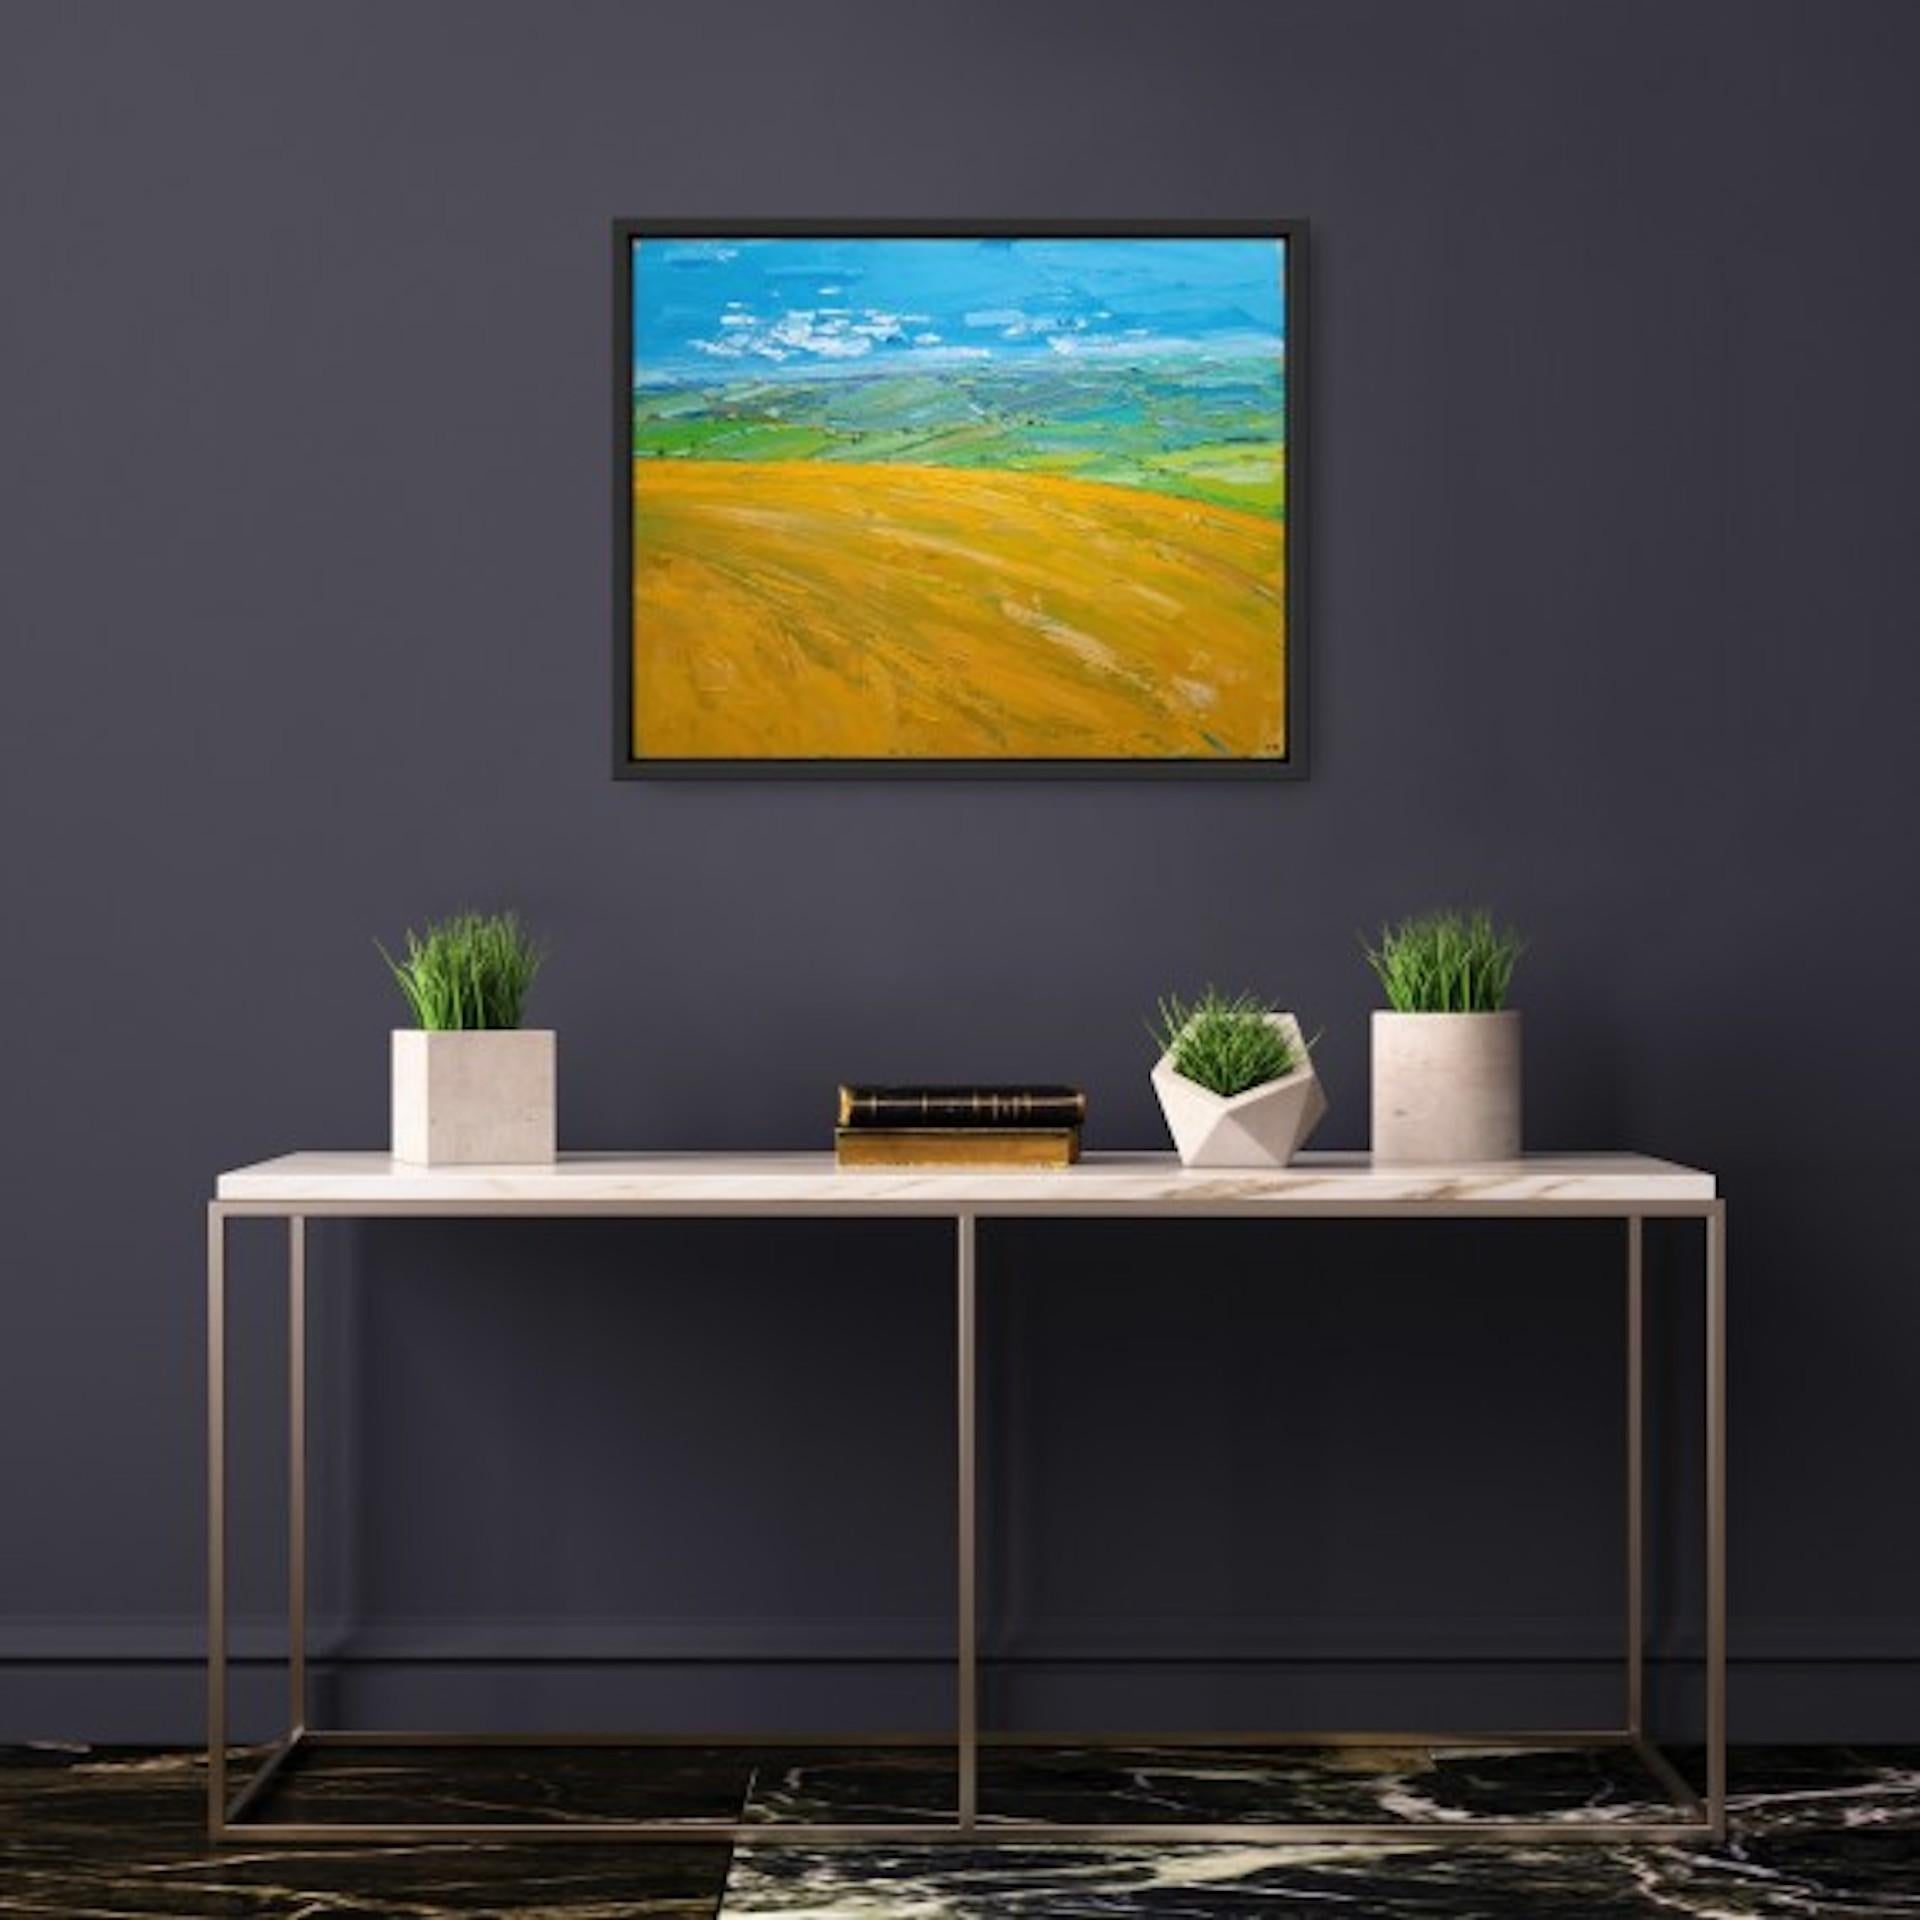 Barley Field View, Georgie Dowling, Original Landscape Painting, Cotswold Art For Sale 4